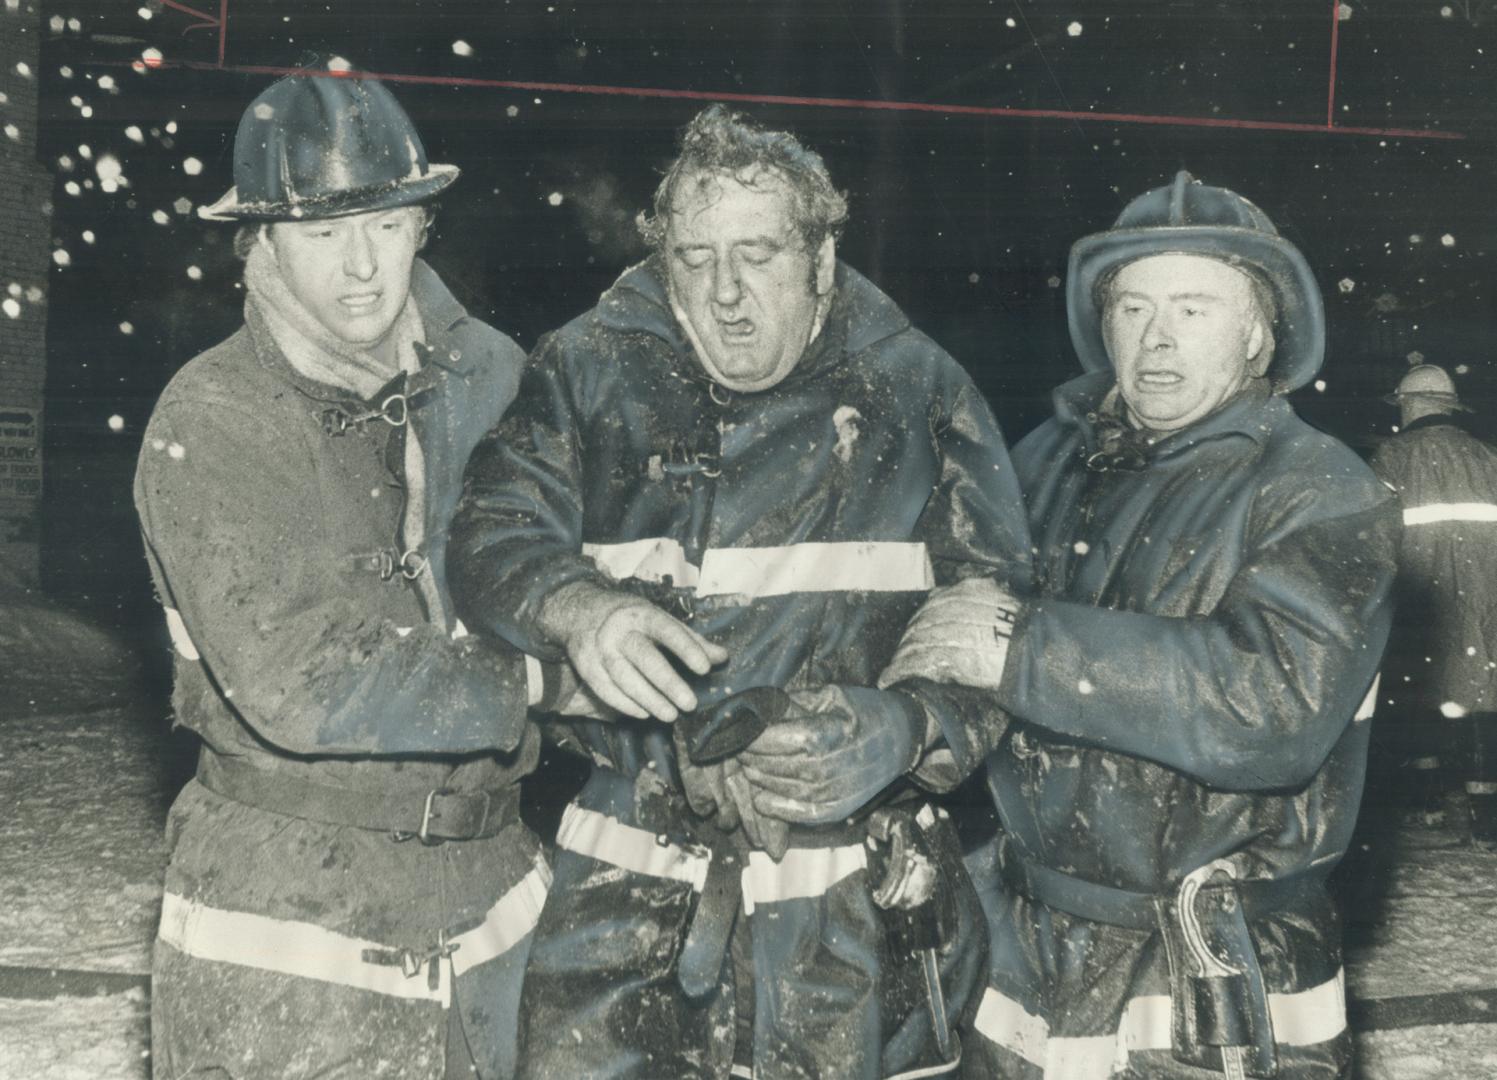 Aid to a buddy in distress, Fireman Bill Bennett of number 8 Station is helped to ambulance by firefighter Bill Cameron (left) and Trevor Harris durin(...)